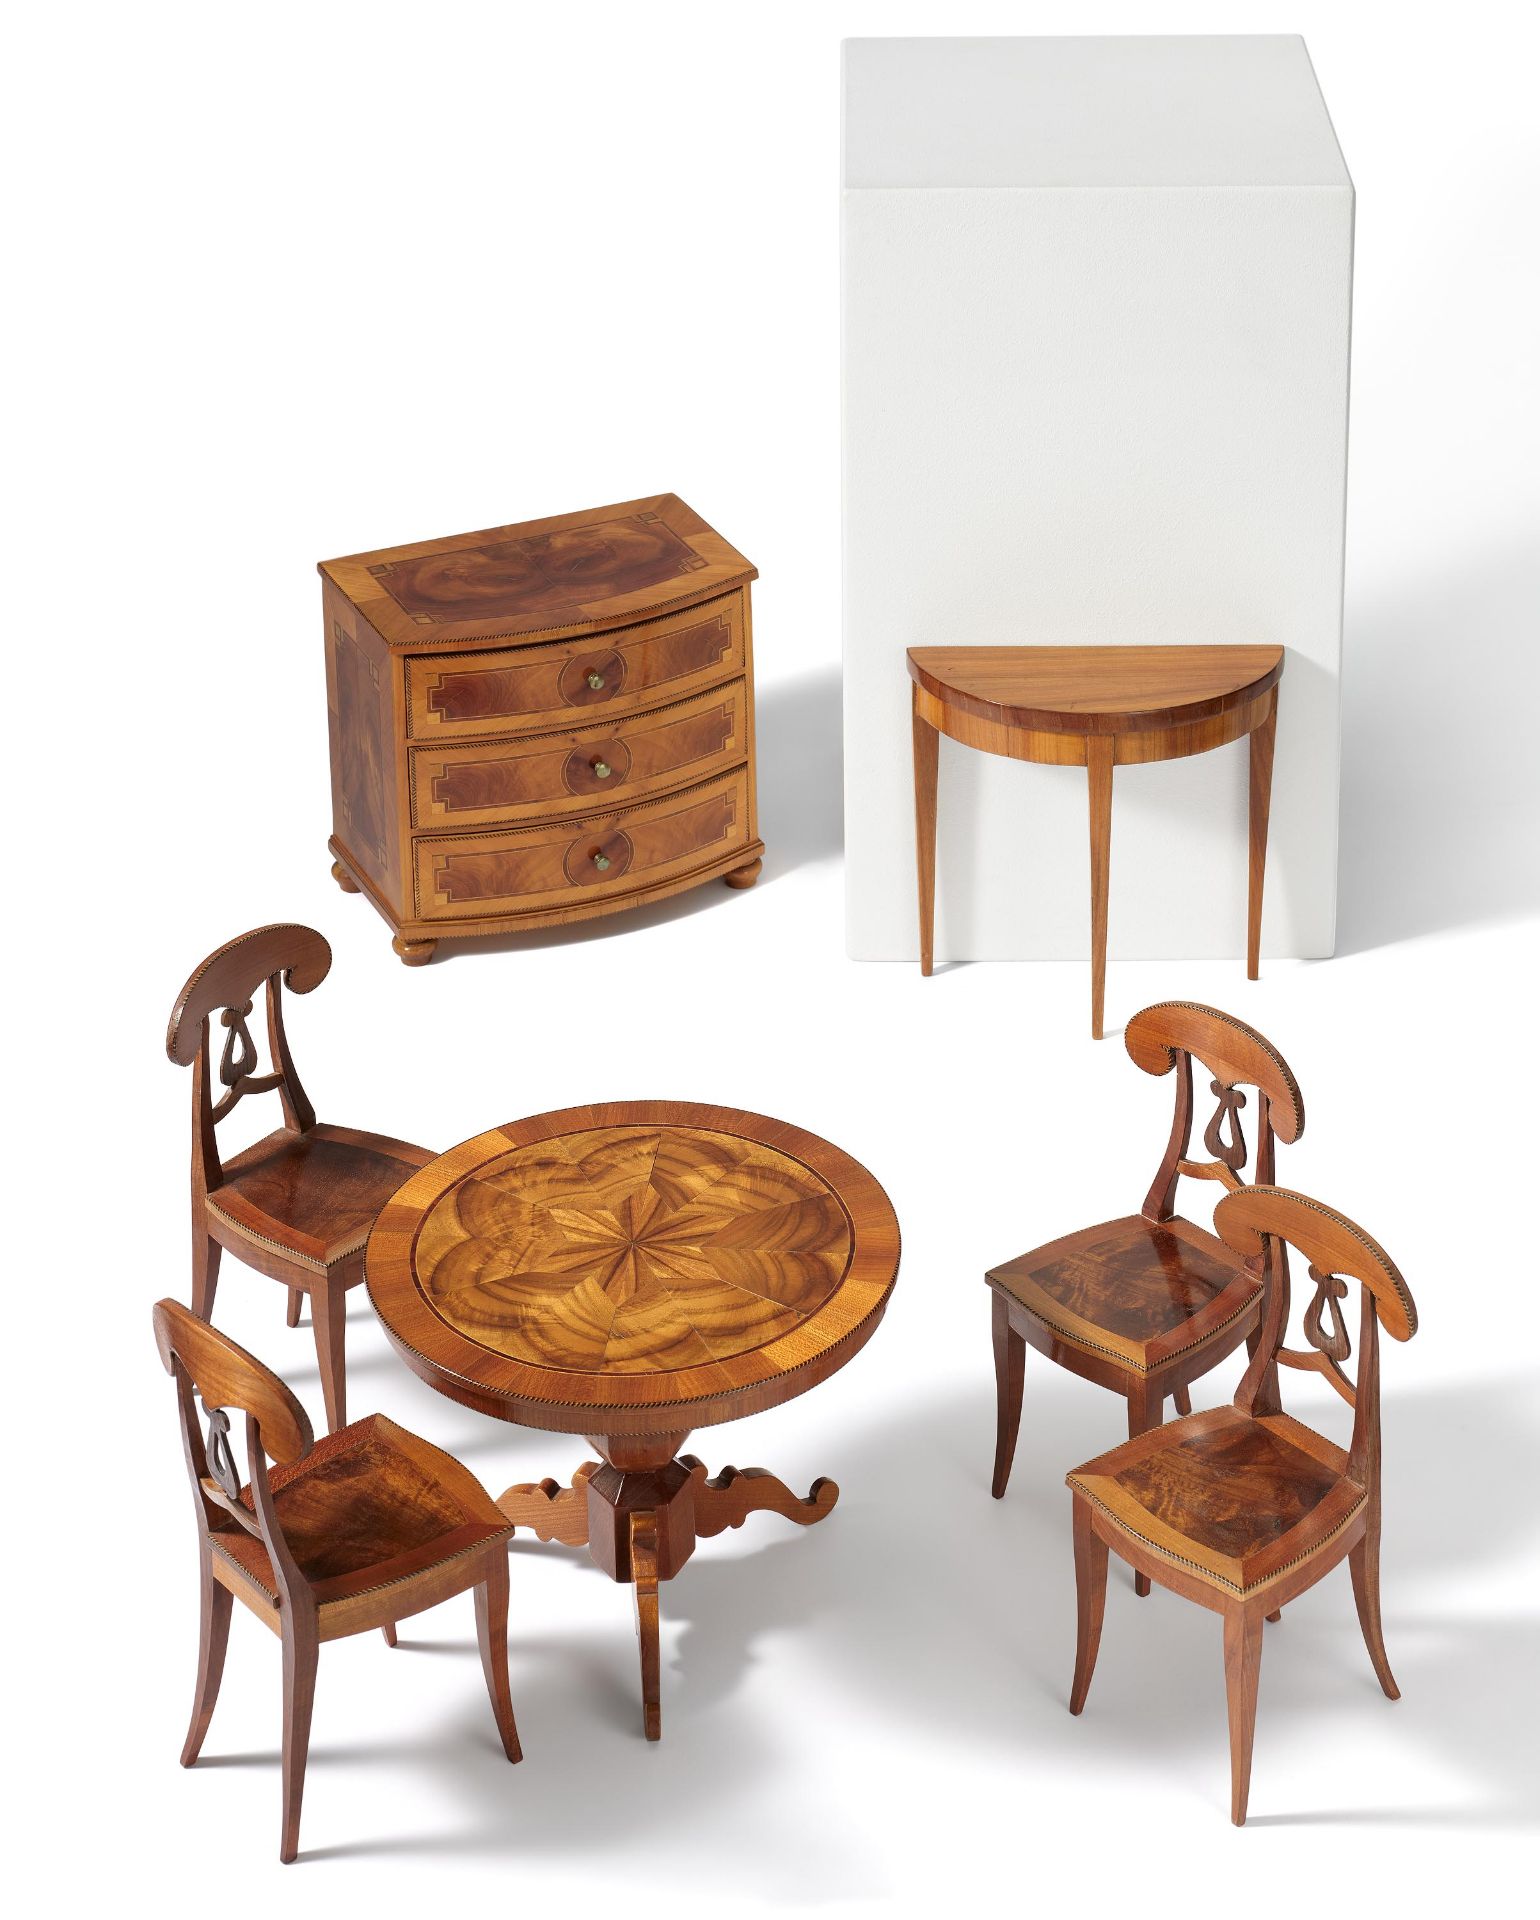 Italy: FURNITURE ENSEMBLE FROM A DOLL HOUSE